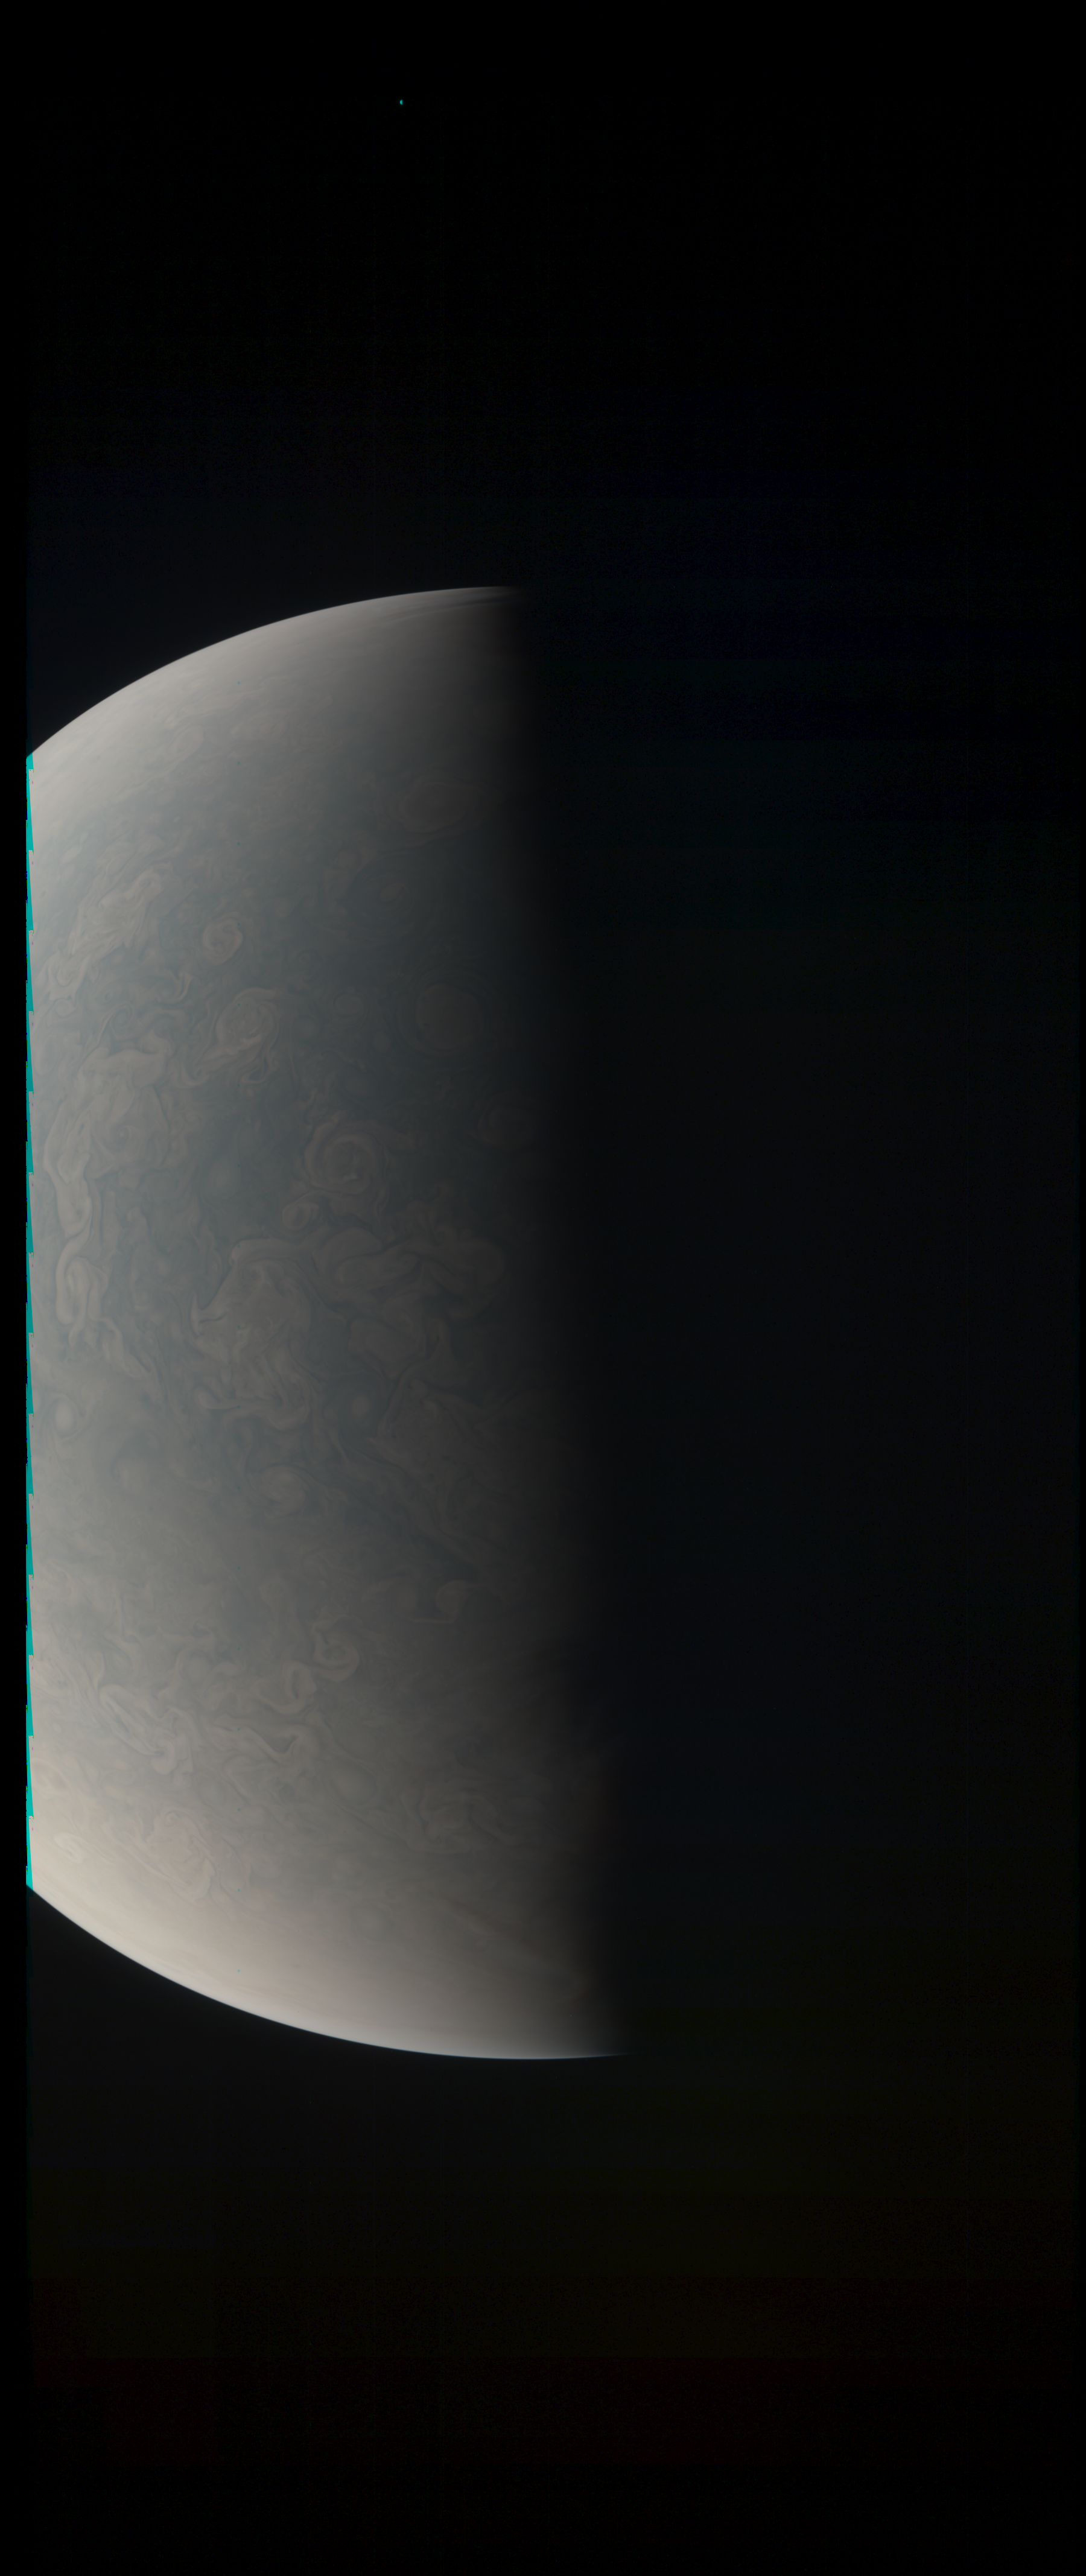 JNCE_2019360_24C00017_V01-raw_proc_hollow_sphere_c_pj_out.BMP_thumbnail_.png